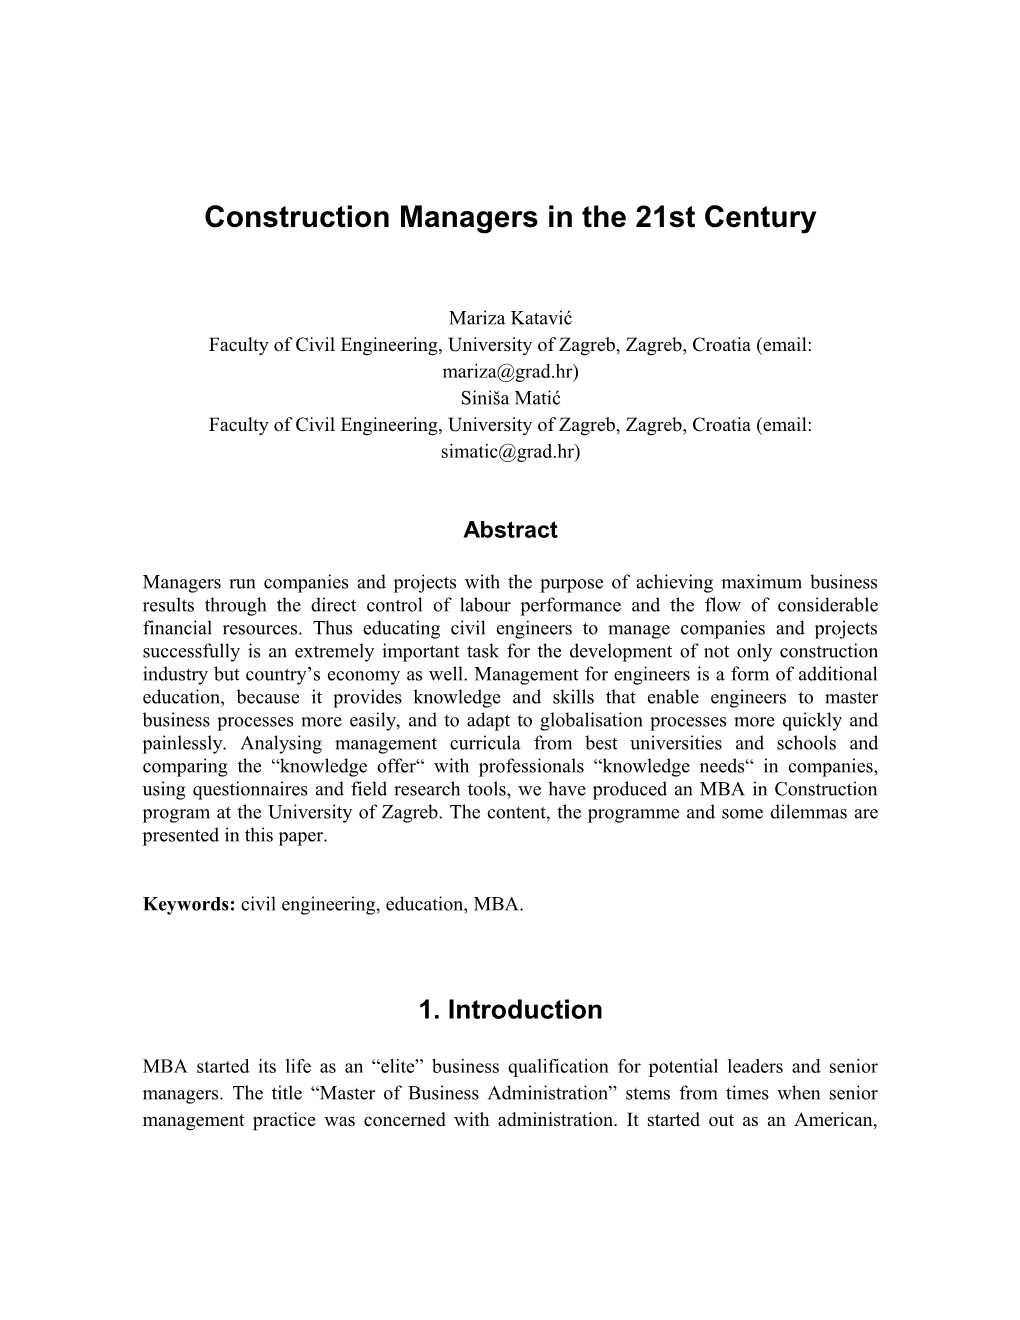 The Diffusion of B2B in the Construction Market: Organizational, Economic and Technological